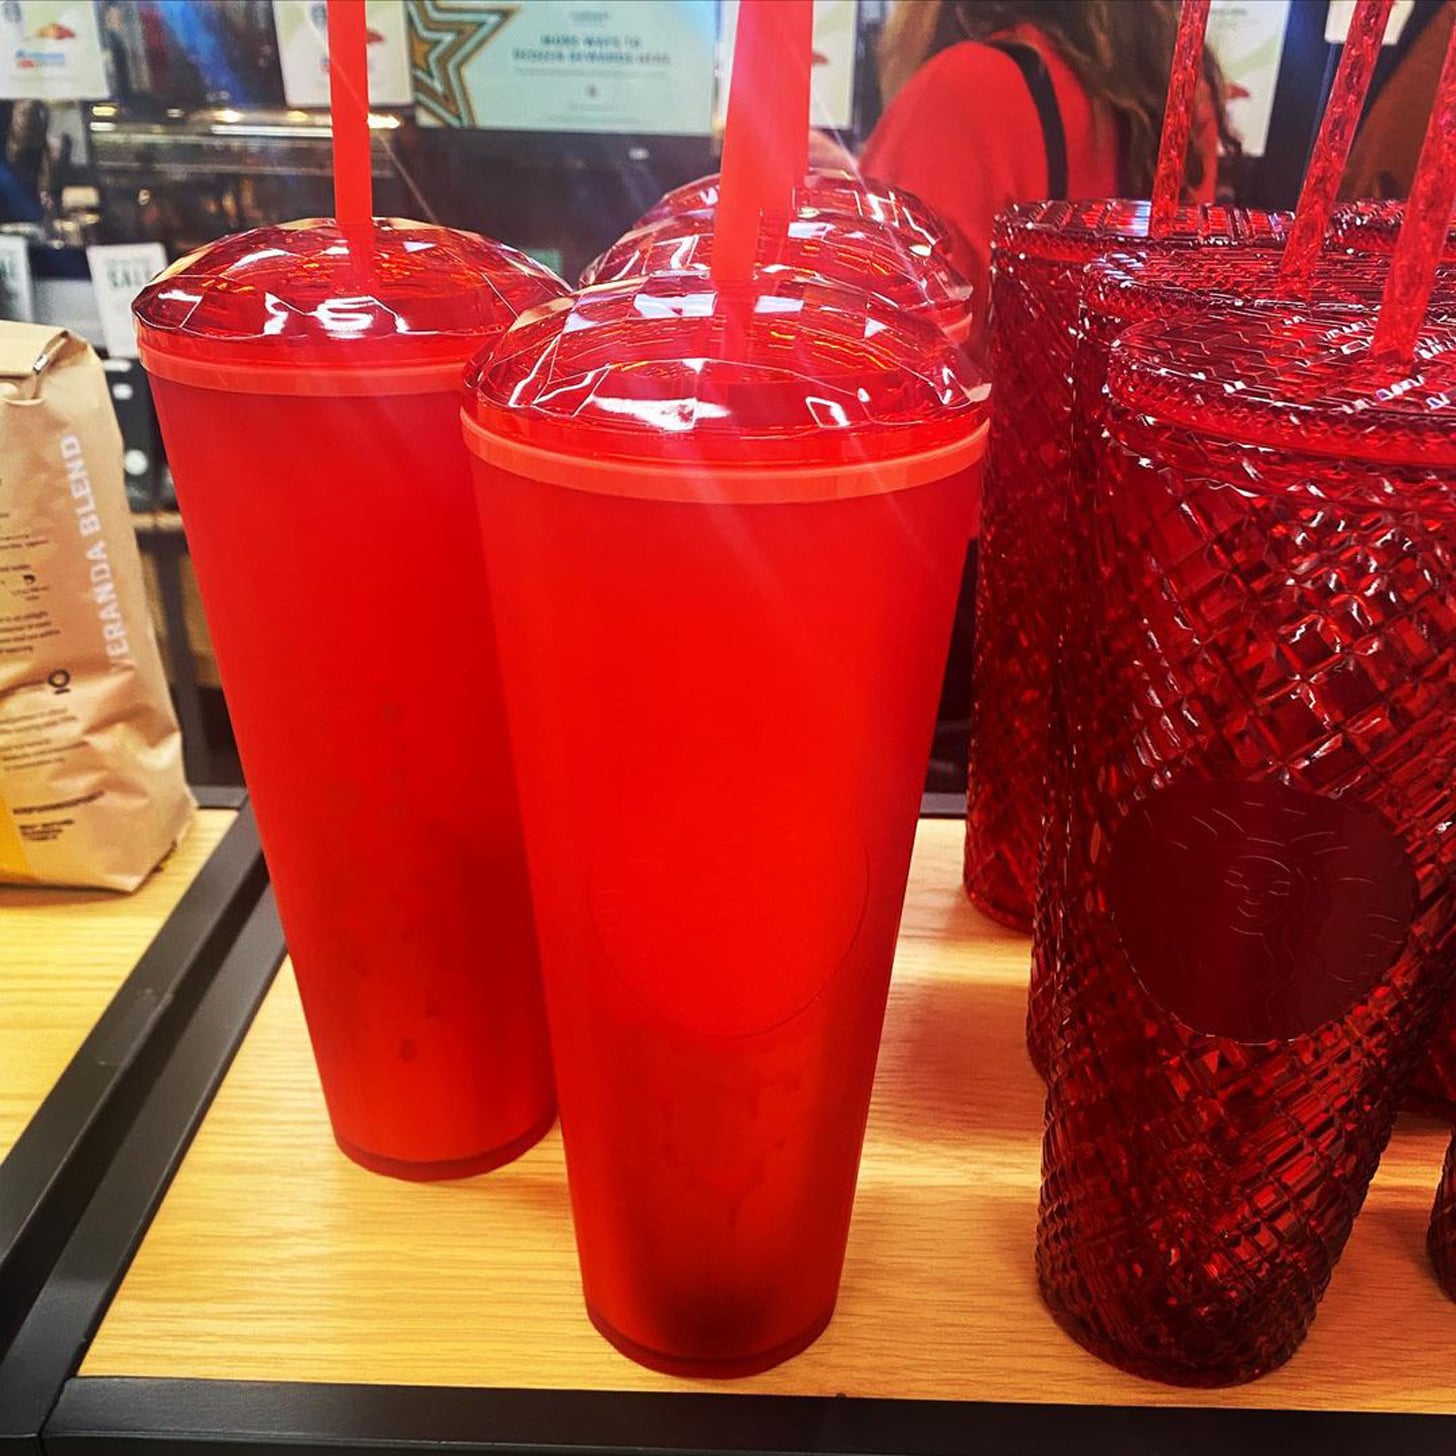 People Have Spotted Starbucks' Valentine's Day Tumblers In Stores Already